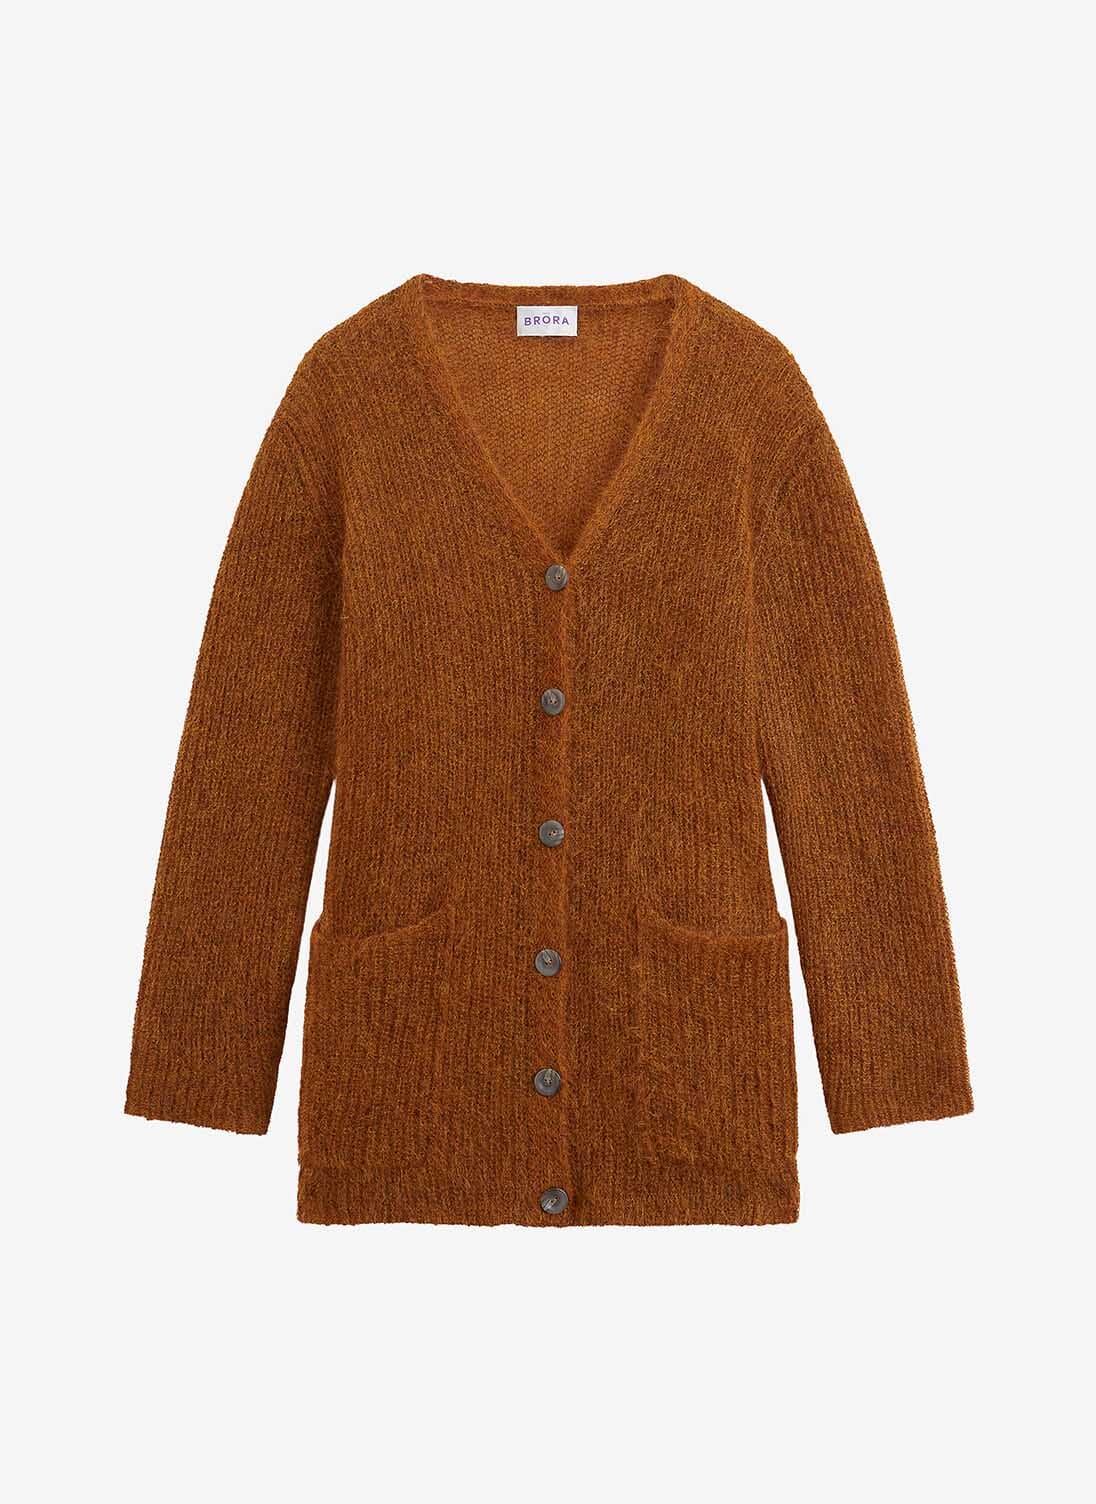 Copper Mohair Ribbed Cardigan | Women's Mohair Cardigans | Brora